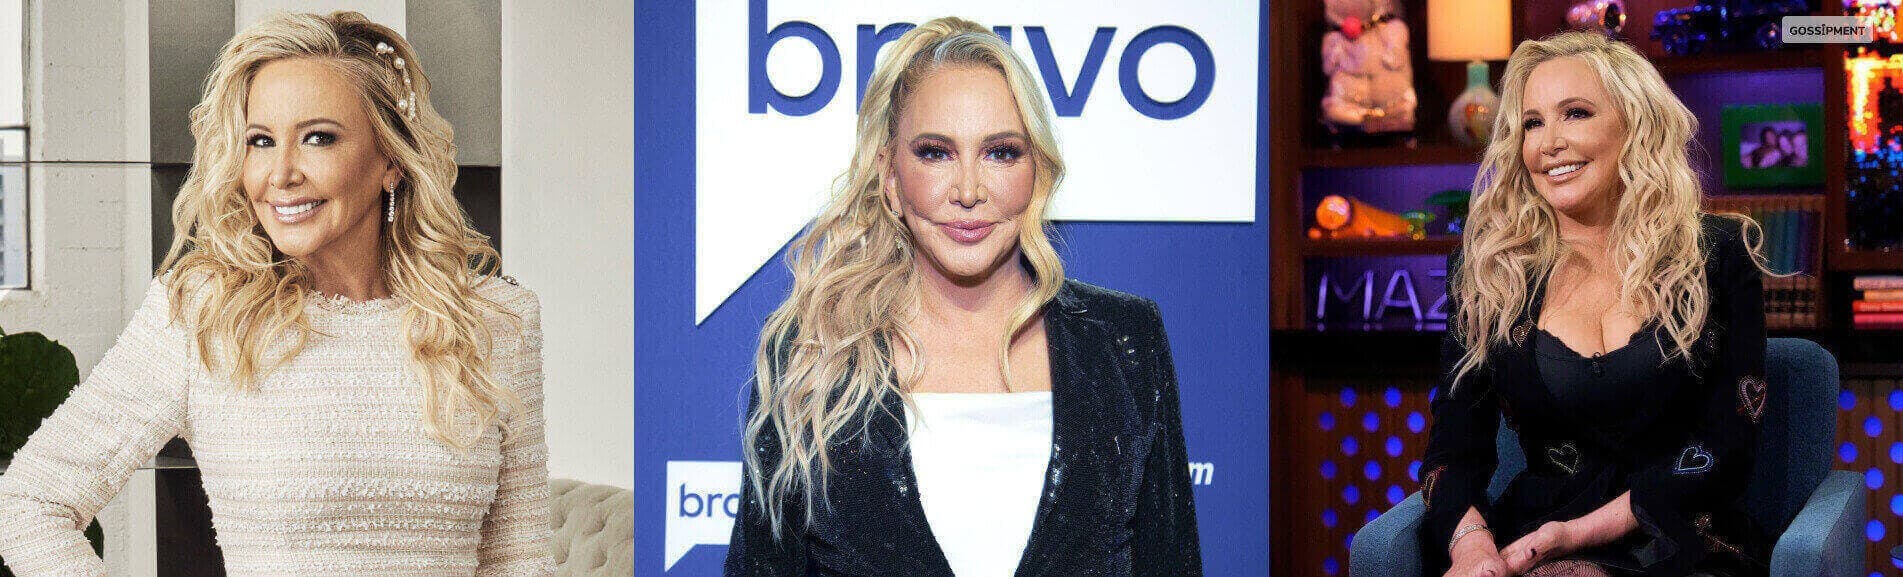 Cover Image for Shannon Beador Is Trying To Cover Her Bruises And Injuries After DUI Arrest